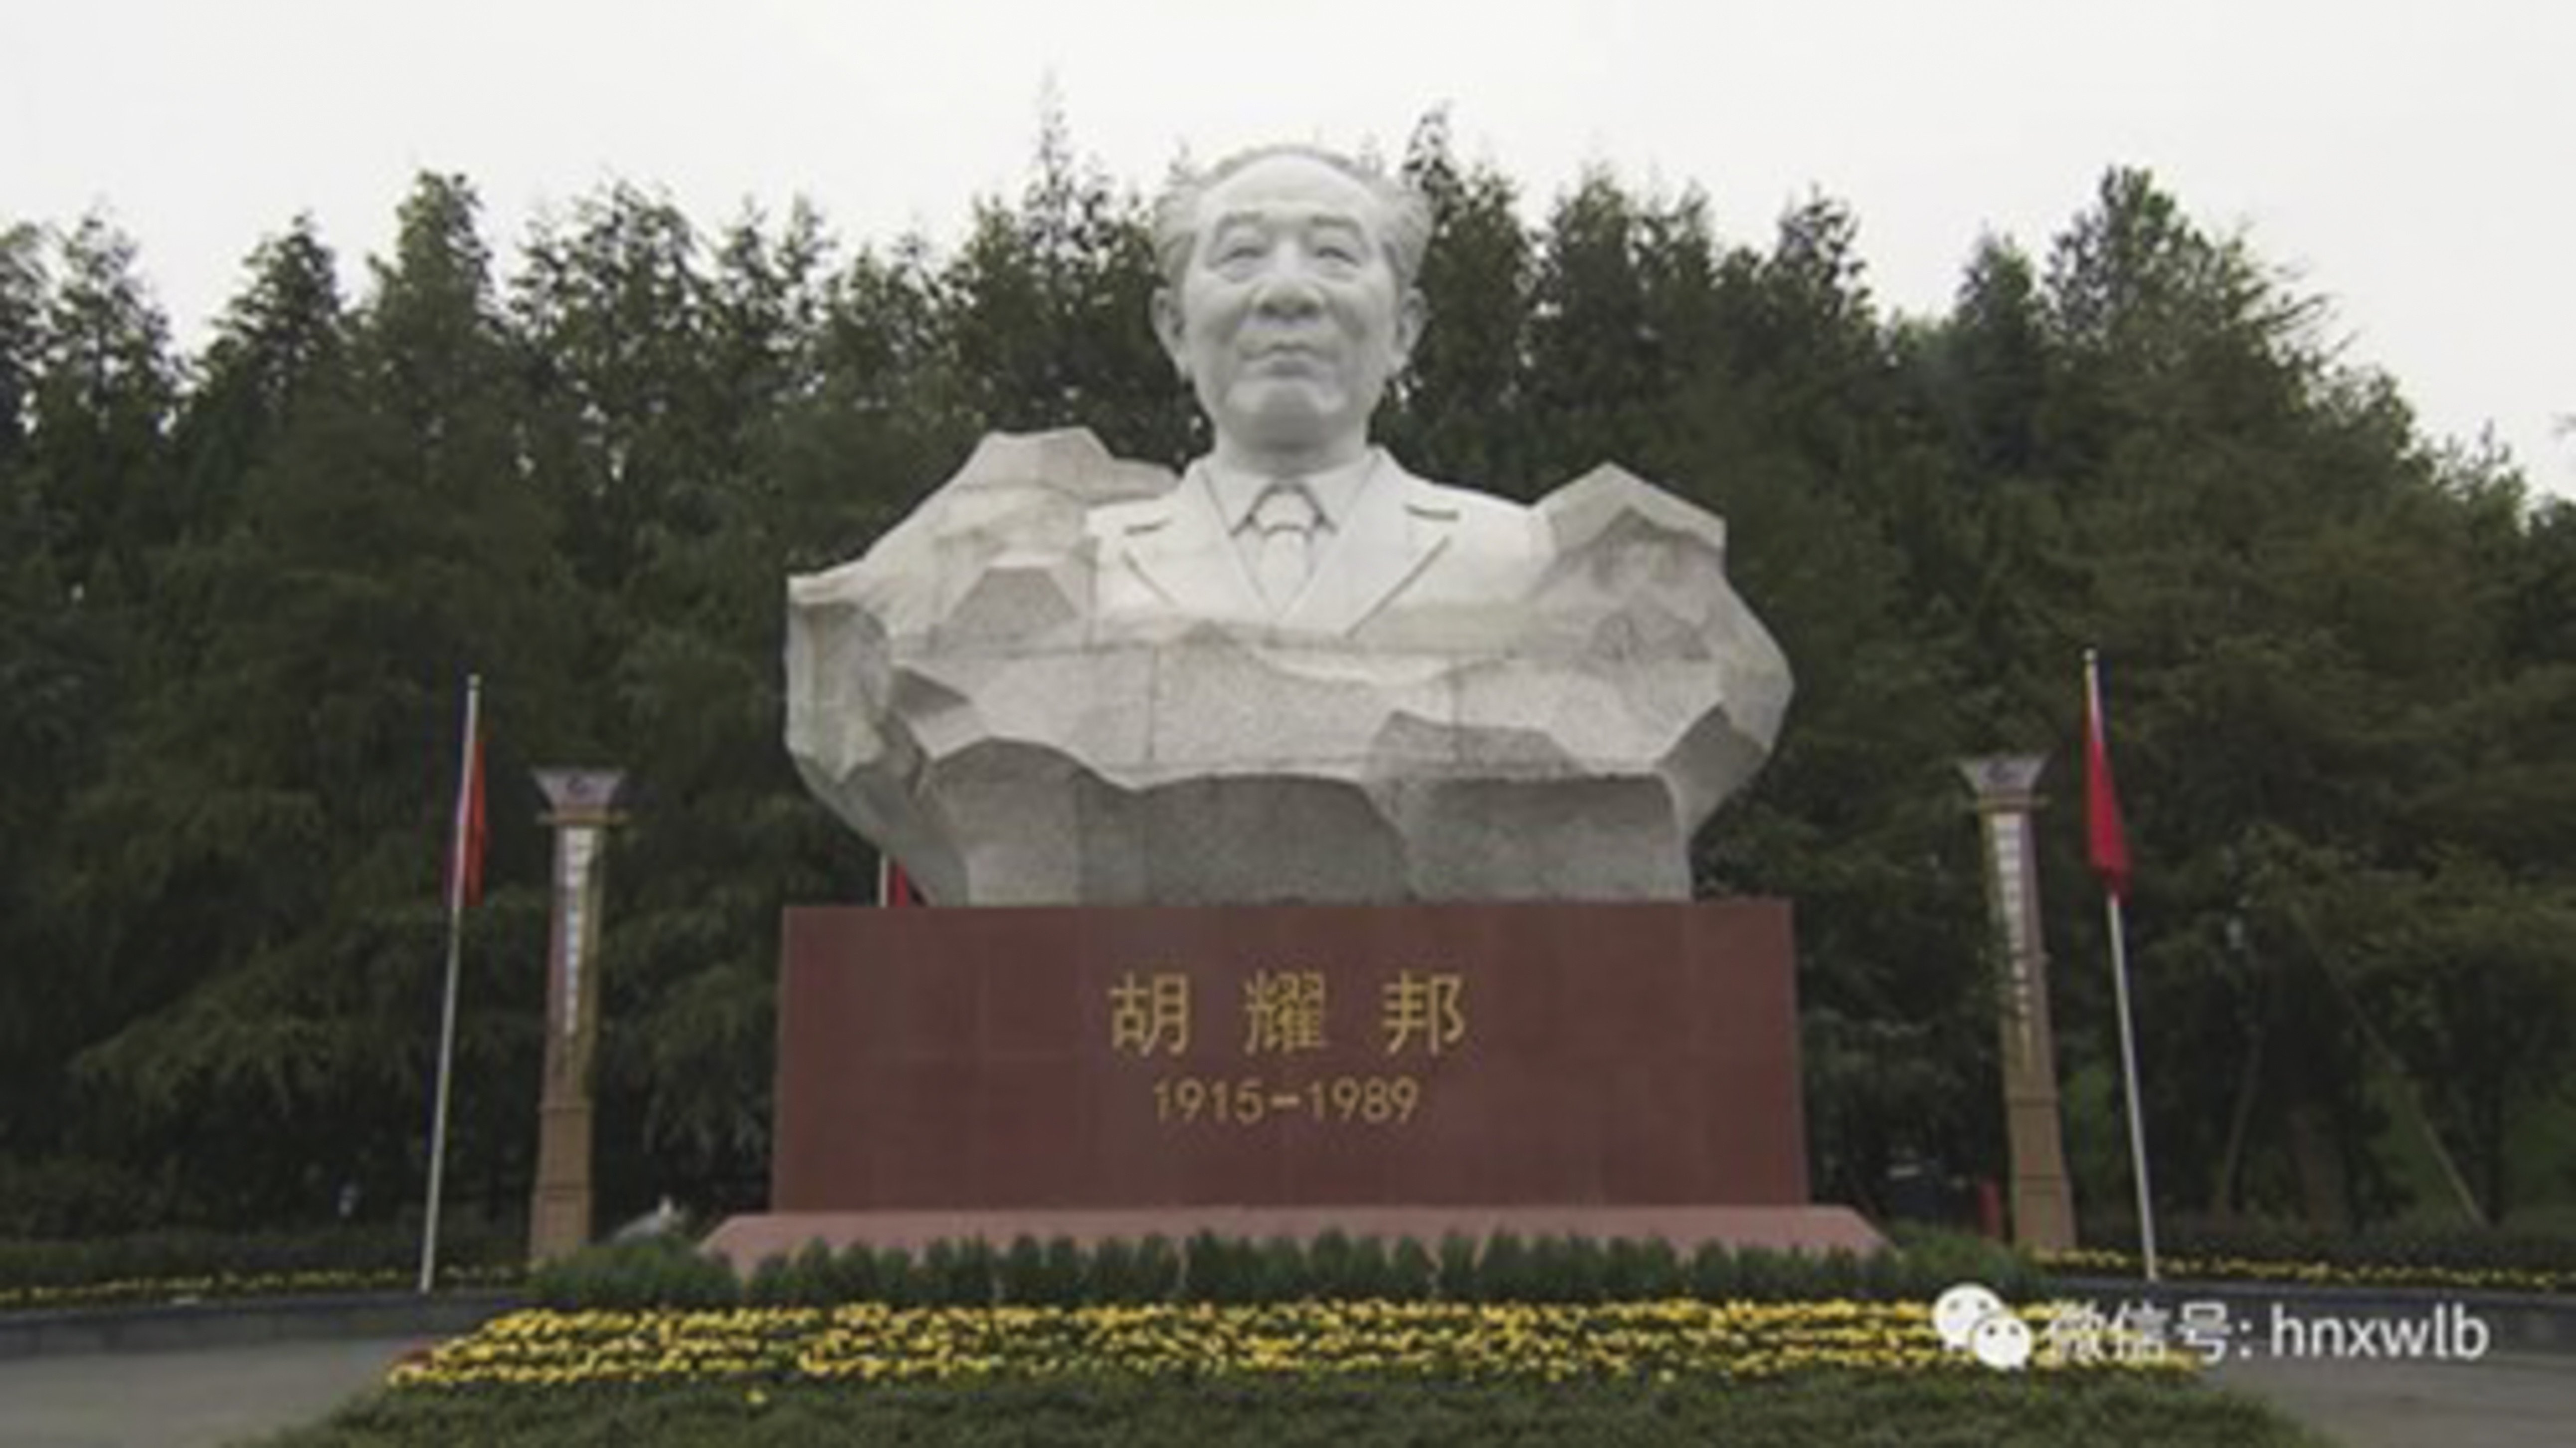 The statue of late leader Hu Yaobang was unveiled in his hometown of Liuyang, in Hunan province in October. Photo: Hunan Xinwen Lianbo